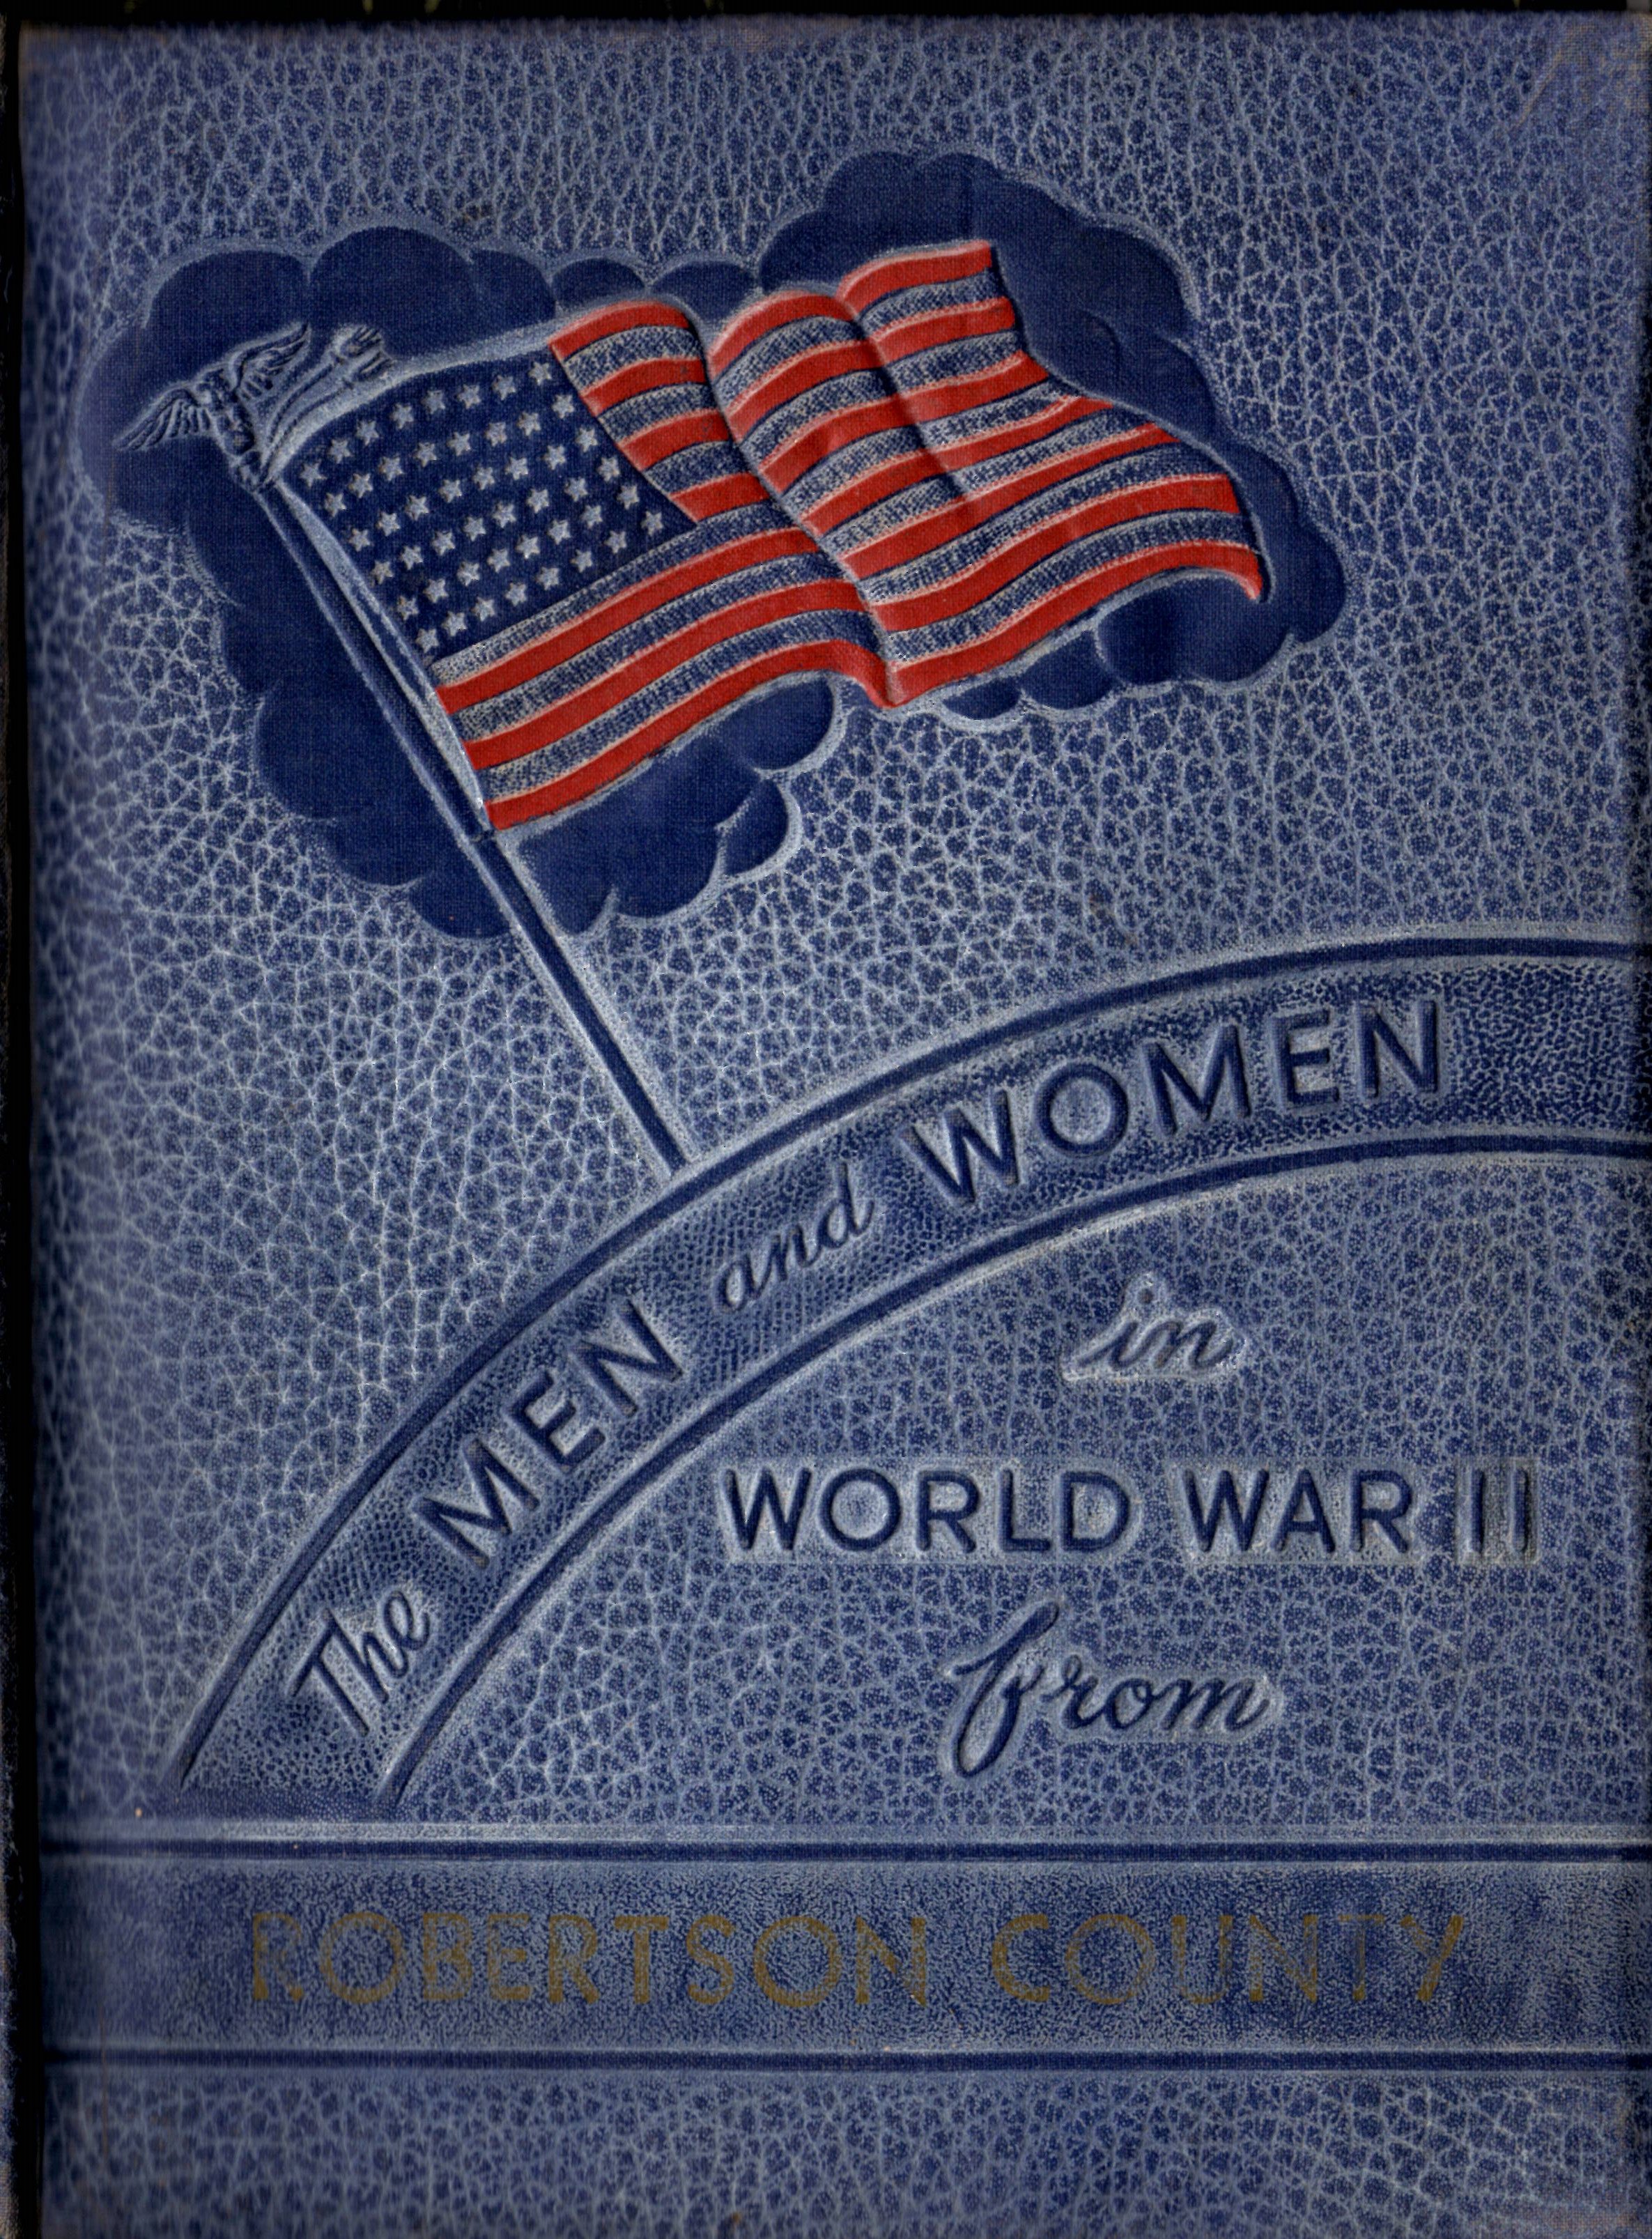 Men and women in the Armed Forces from Robertson County Texas WW2 WWII World War Two 2 II !! 11 